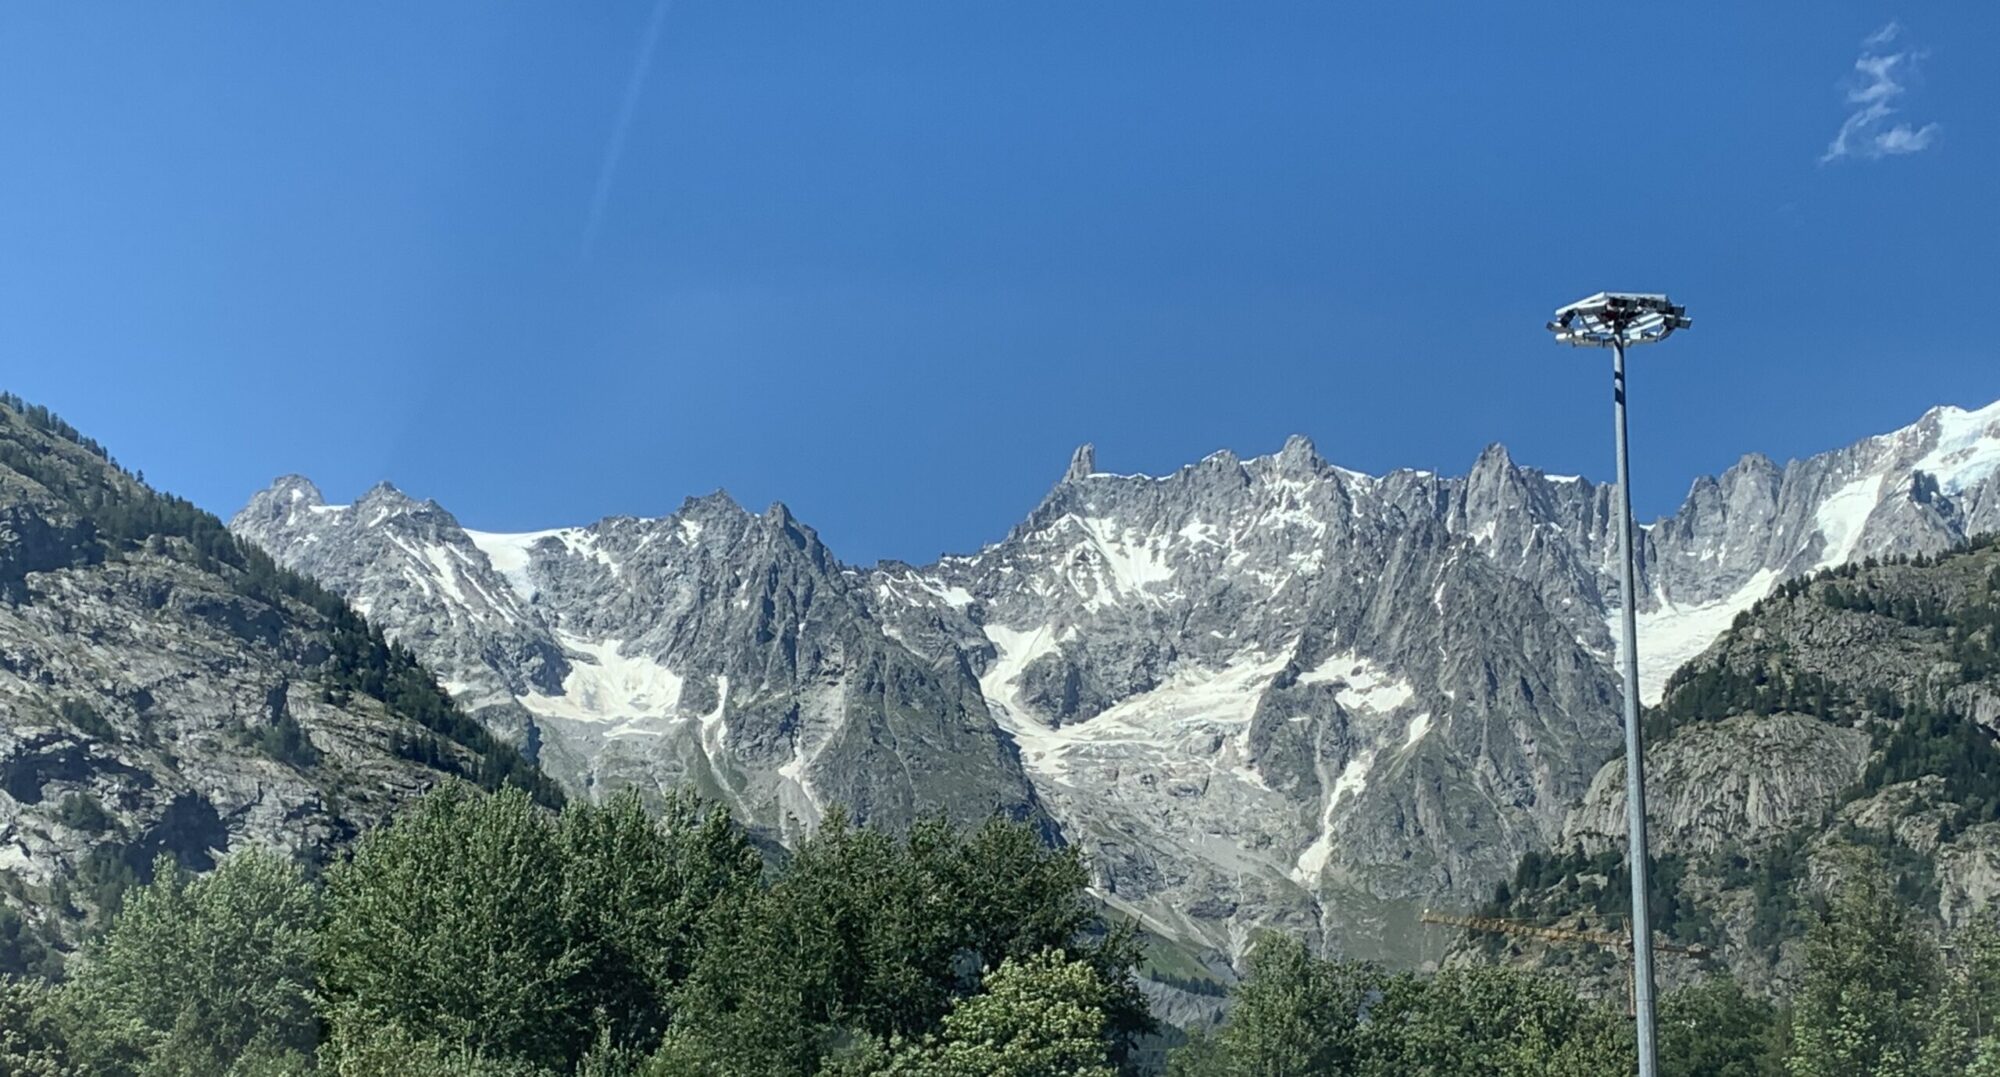 All is worth for this view of the Massiccio del Monte Bianco from the Italian Size. Photo: The-Ski-Guru. The Drive to Our Summer Holiday on Covid-19 Times.